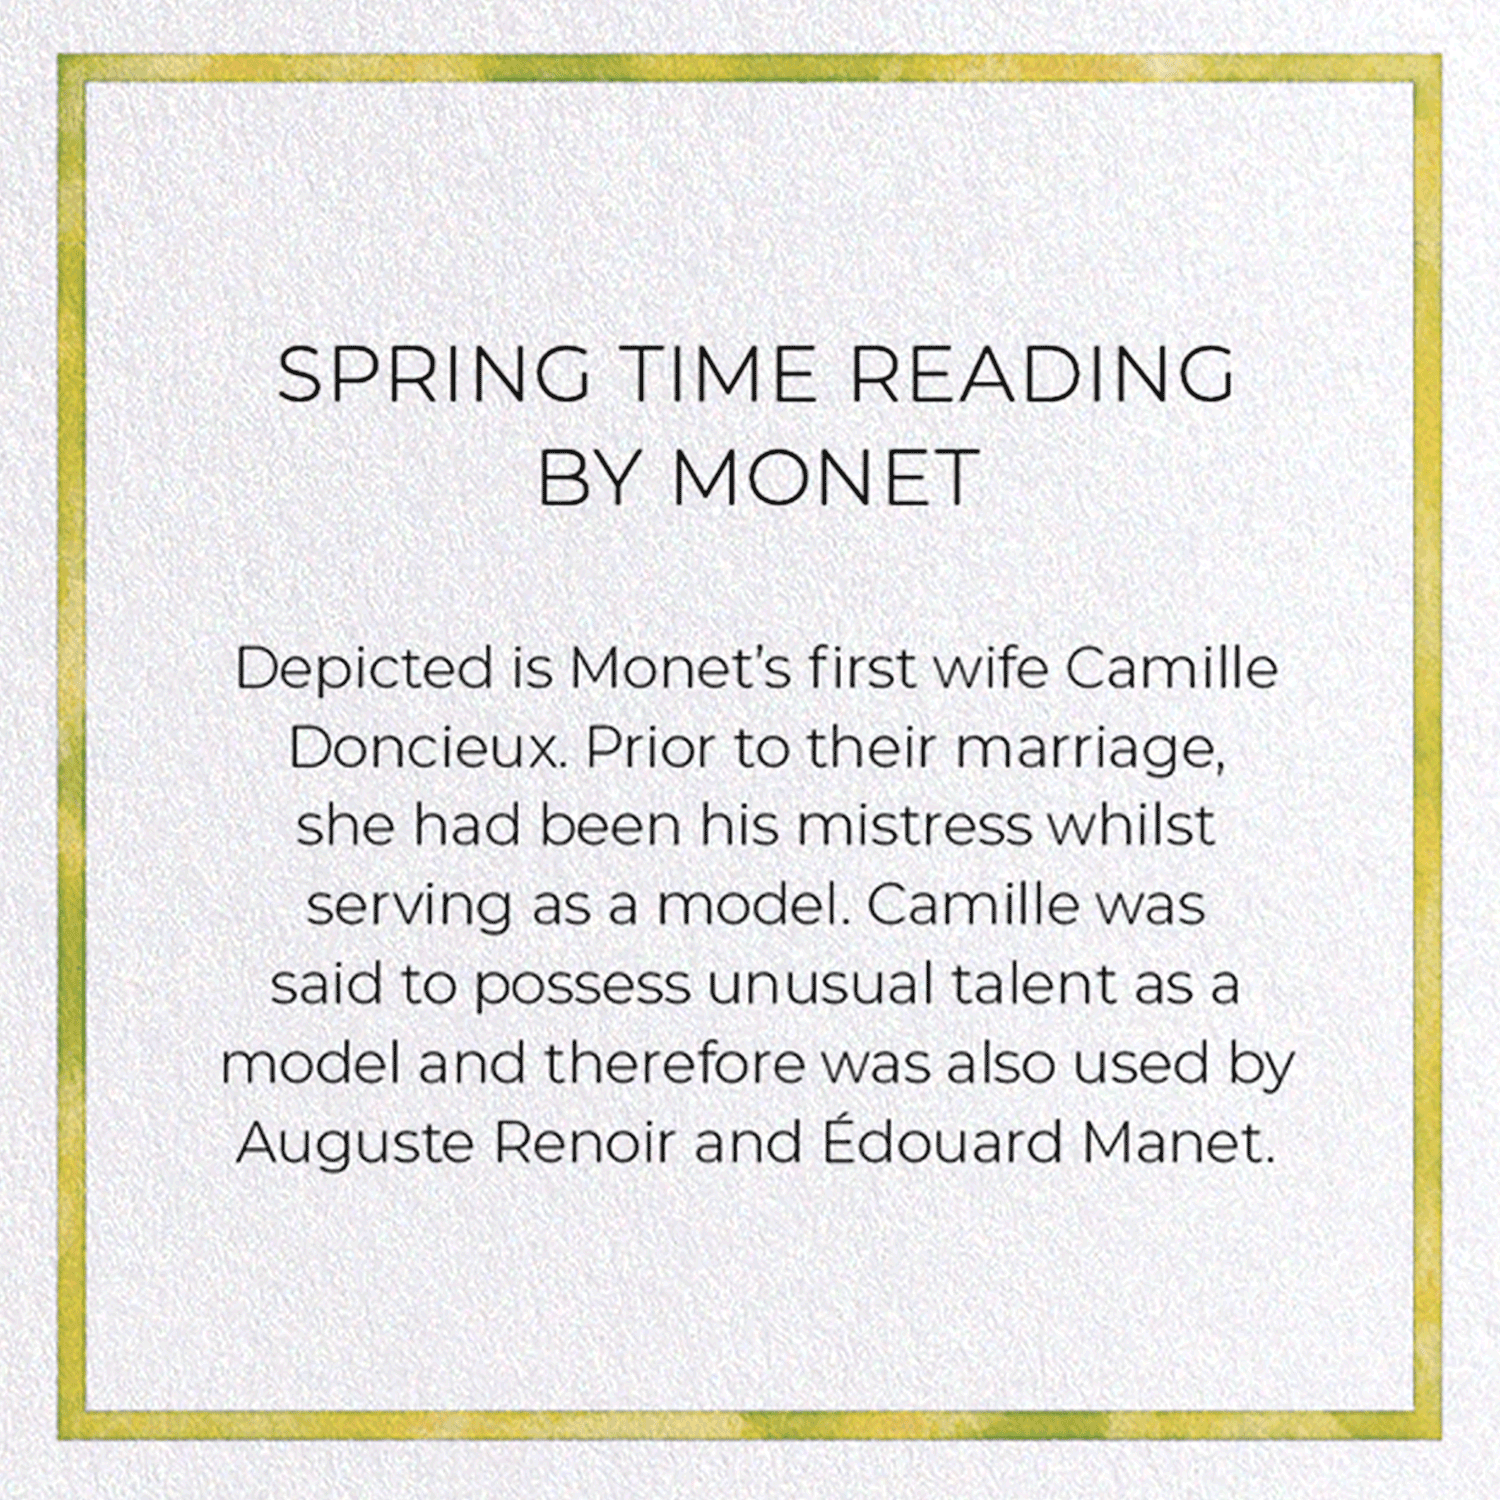 SPRING TIME READING BY MONET